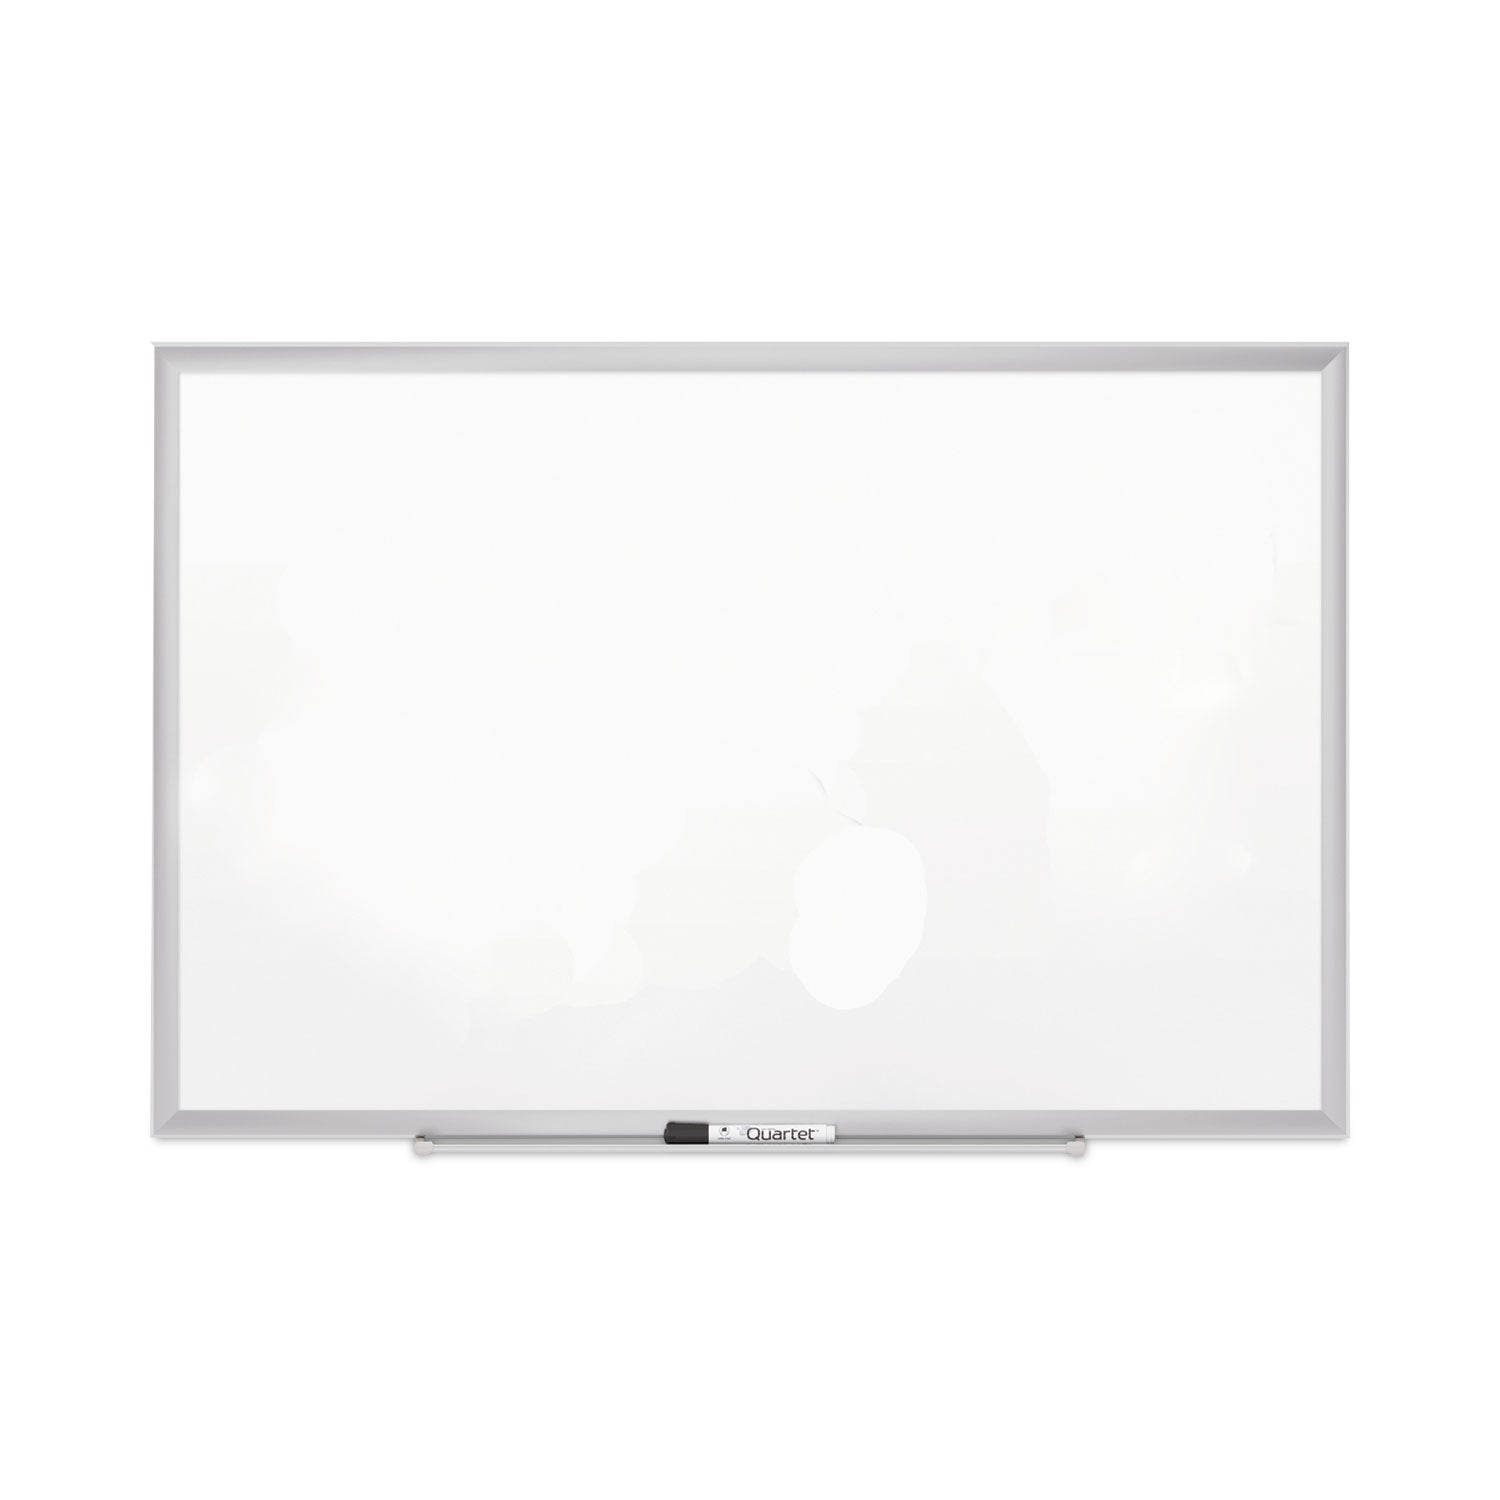 Classic Series Porcelain Magnetic Dry Erase Board, 36 x 24, White Surface, Silver Aluminum Frame - 